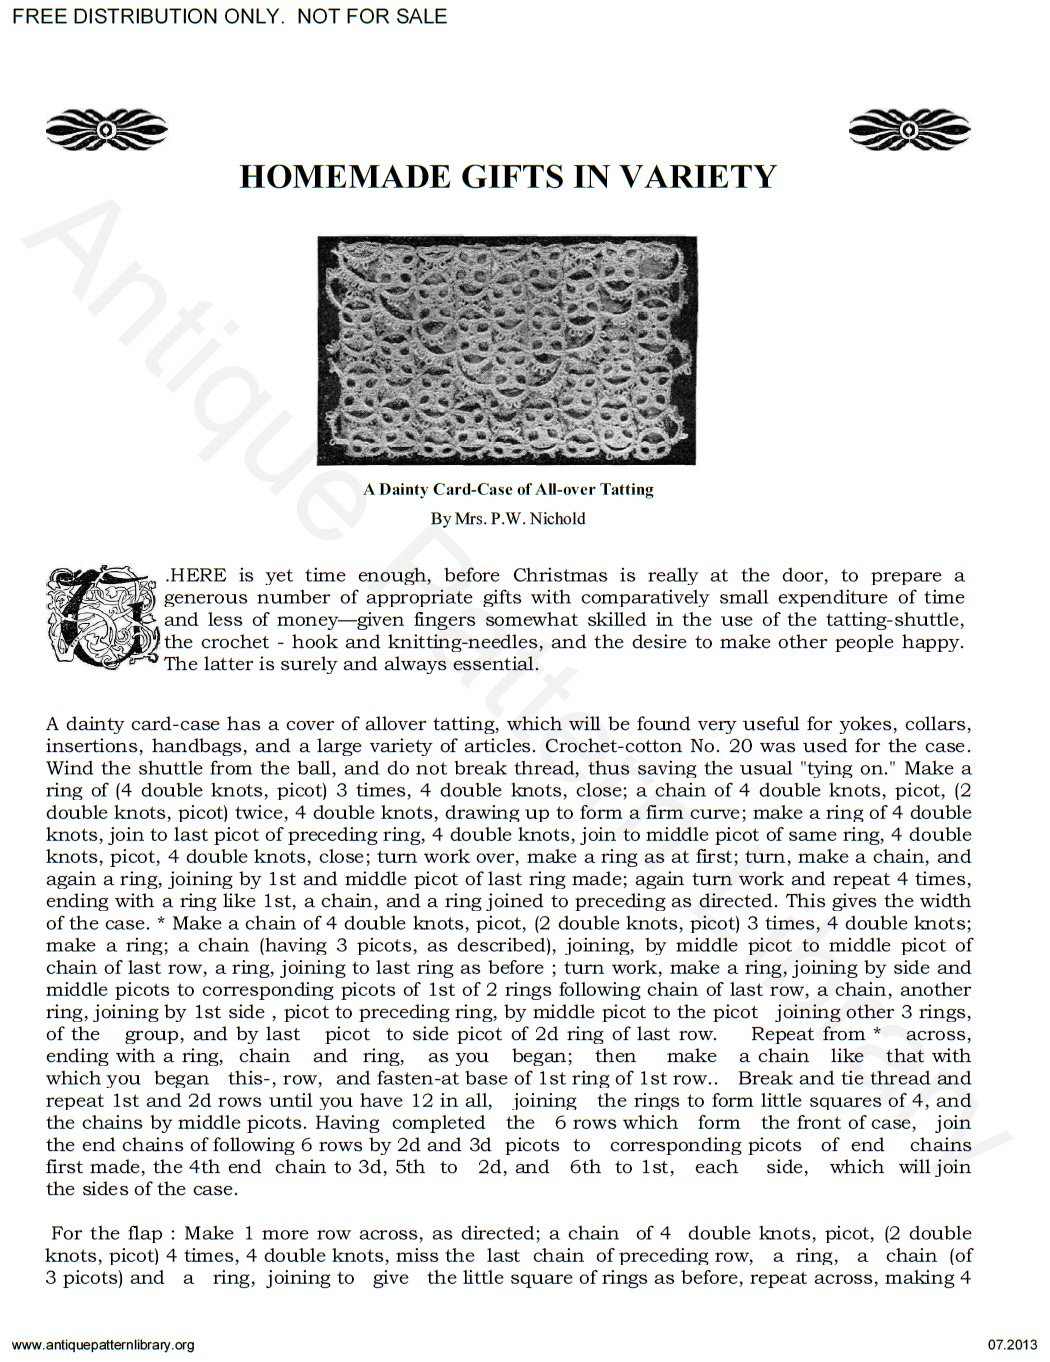 6-AK015 Homemade Gifts in Variety,